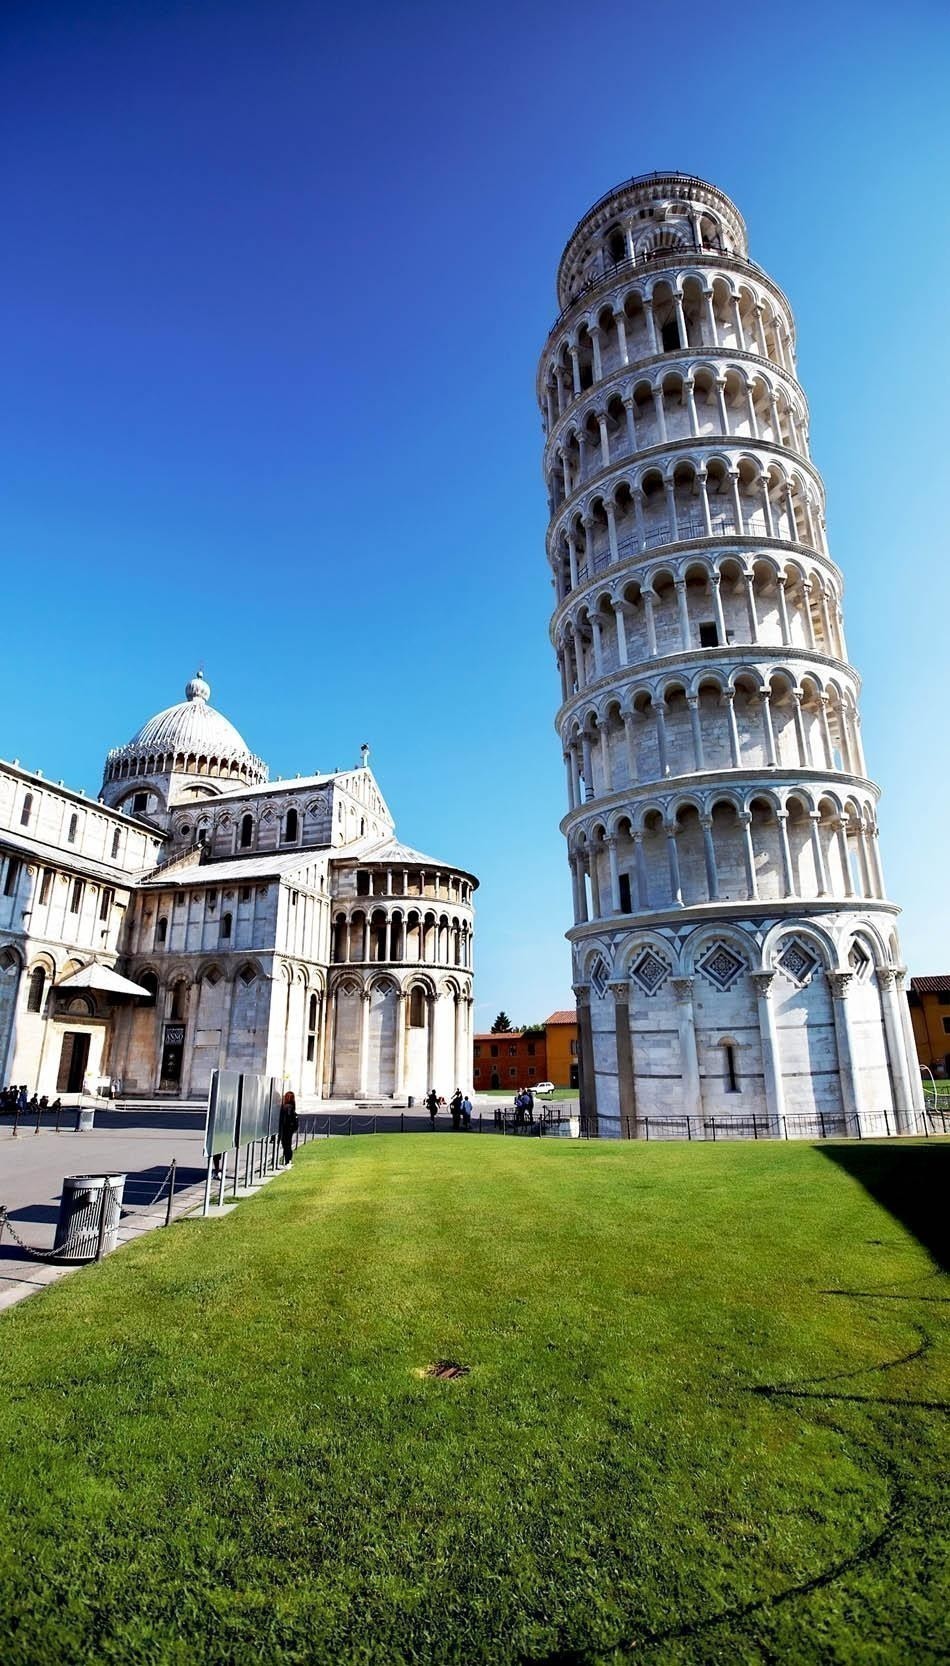 The Famous Leaning Tower, Pisa | Italy Travel Guide